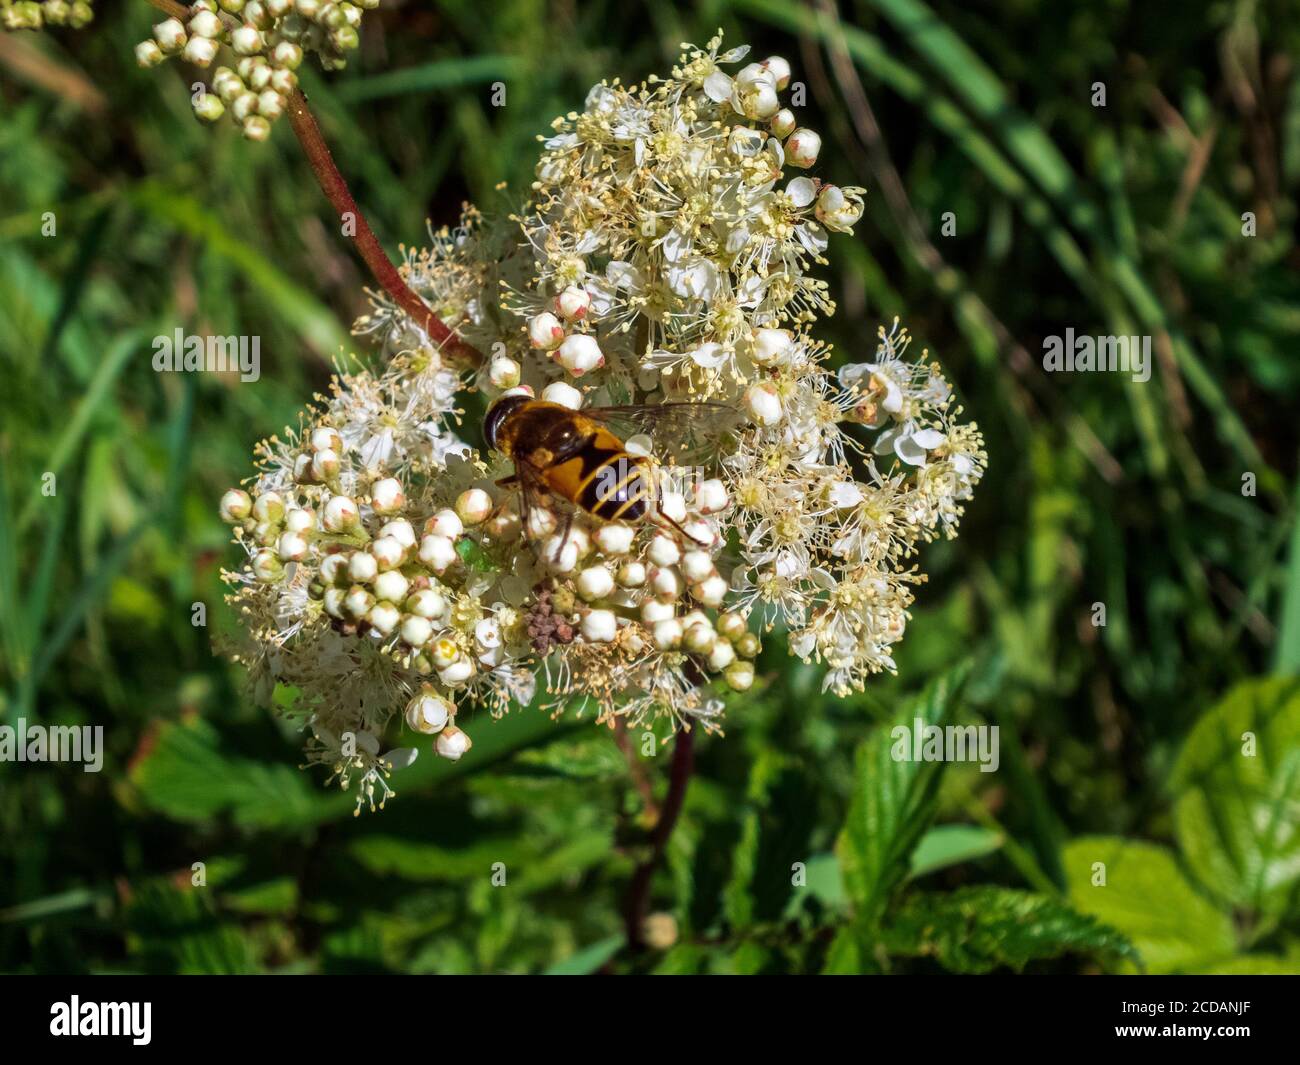 Image of a fly sitting on white flowers of elderberry. Stock Photo